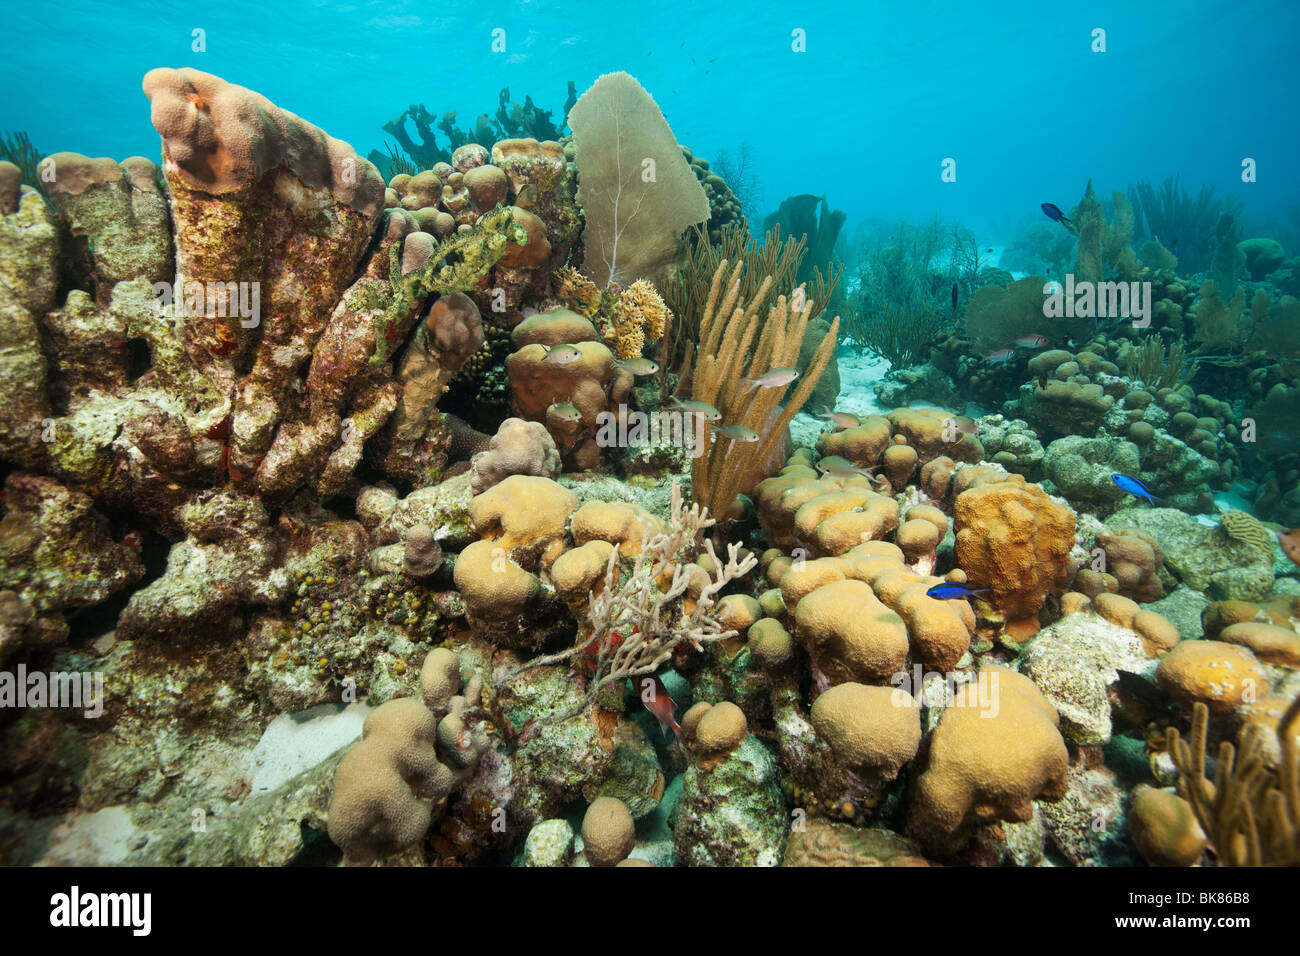 A tropical coral reef in Bonaire, Netherlands Antilles. Stock Photo